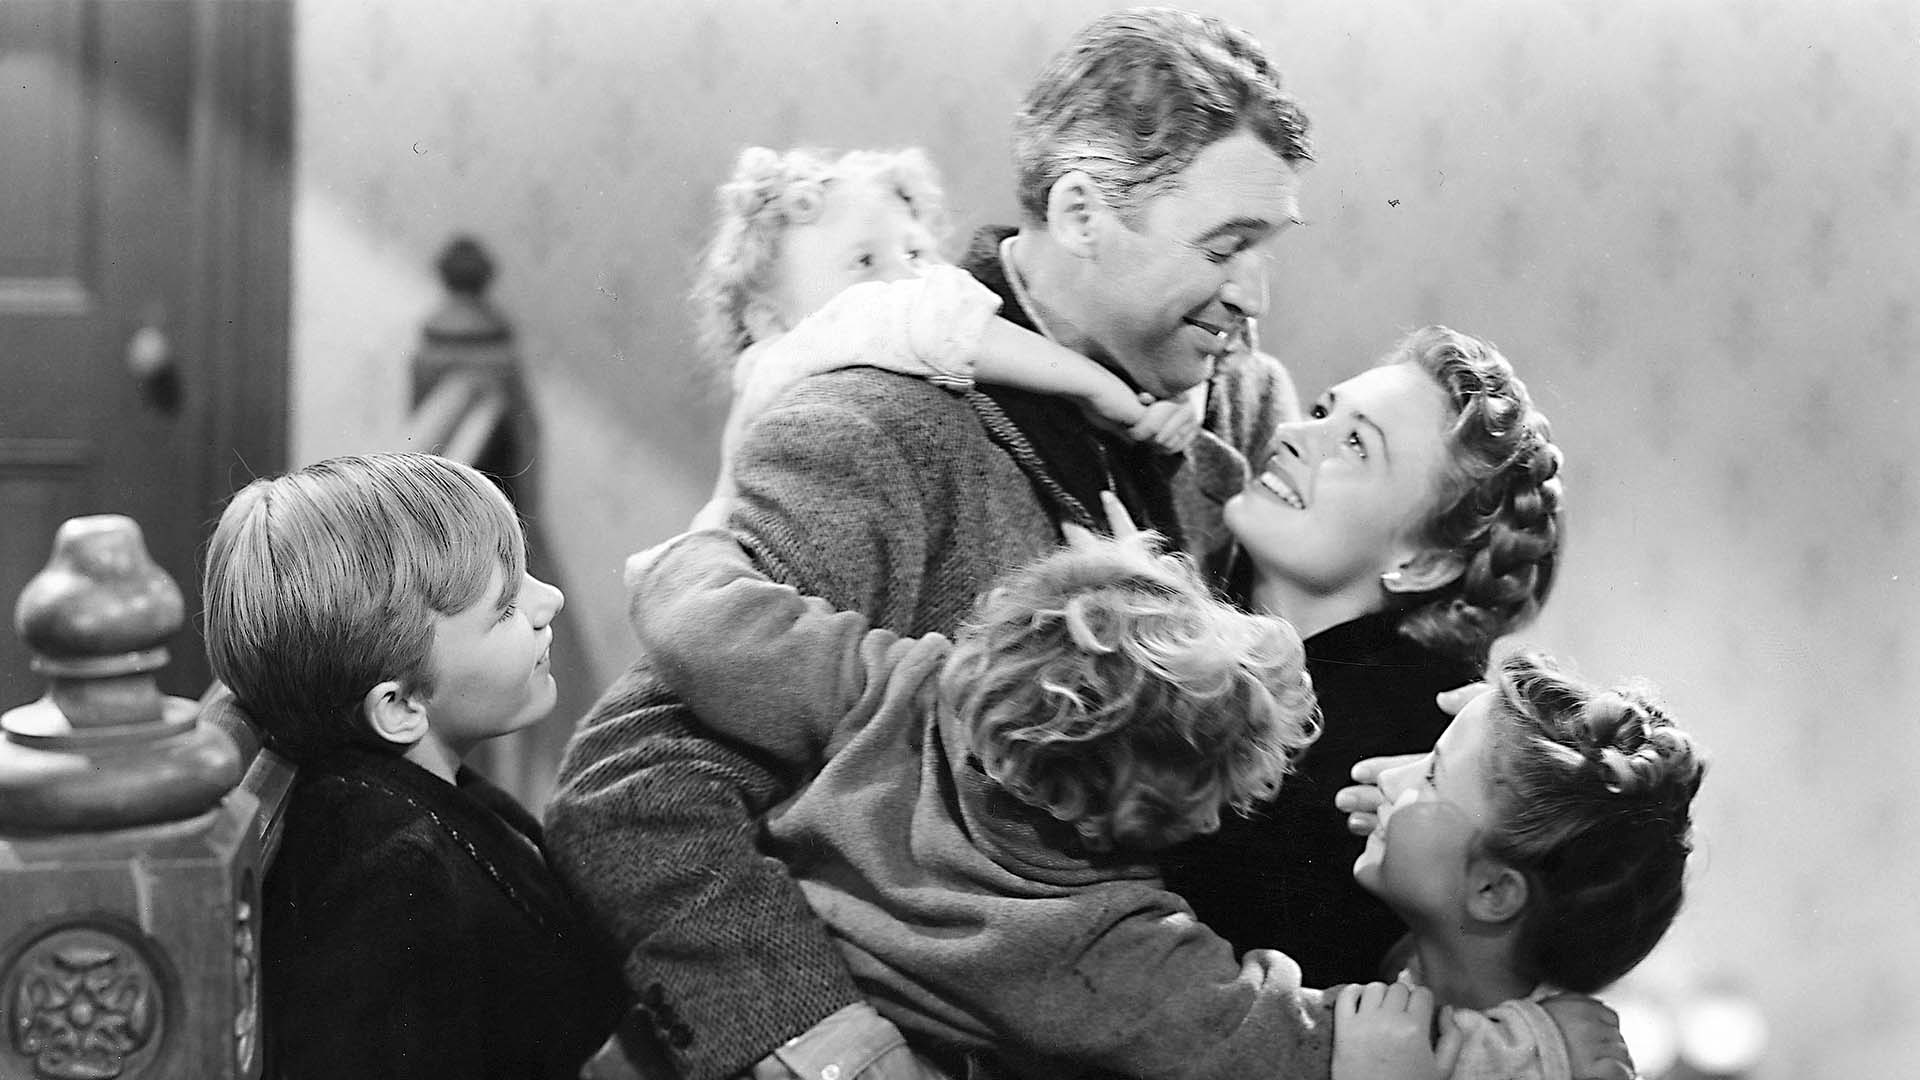 20 CLASSIC CHRISTMAS MOVIES TO GET YOU IN THE FESTIVE MOOD